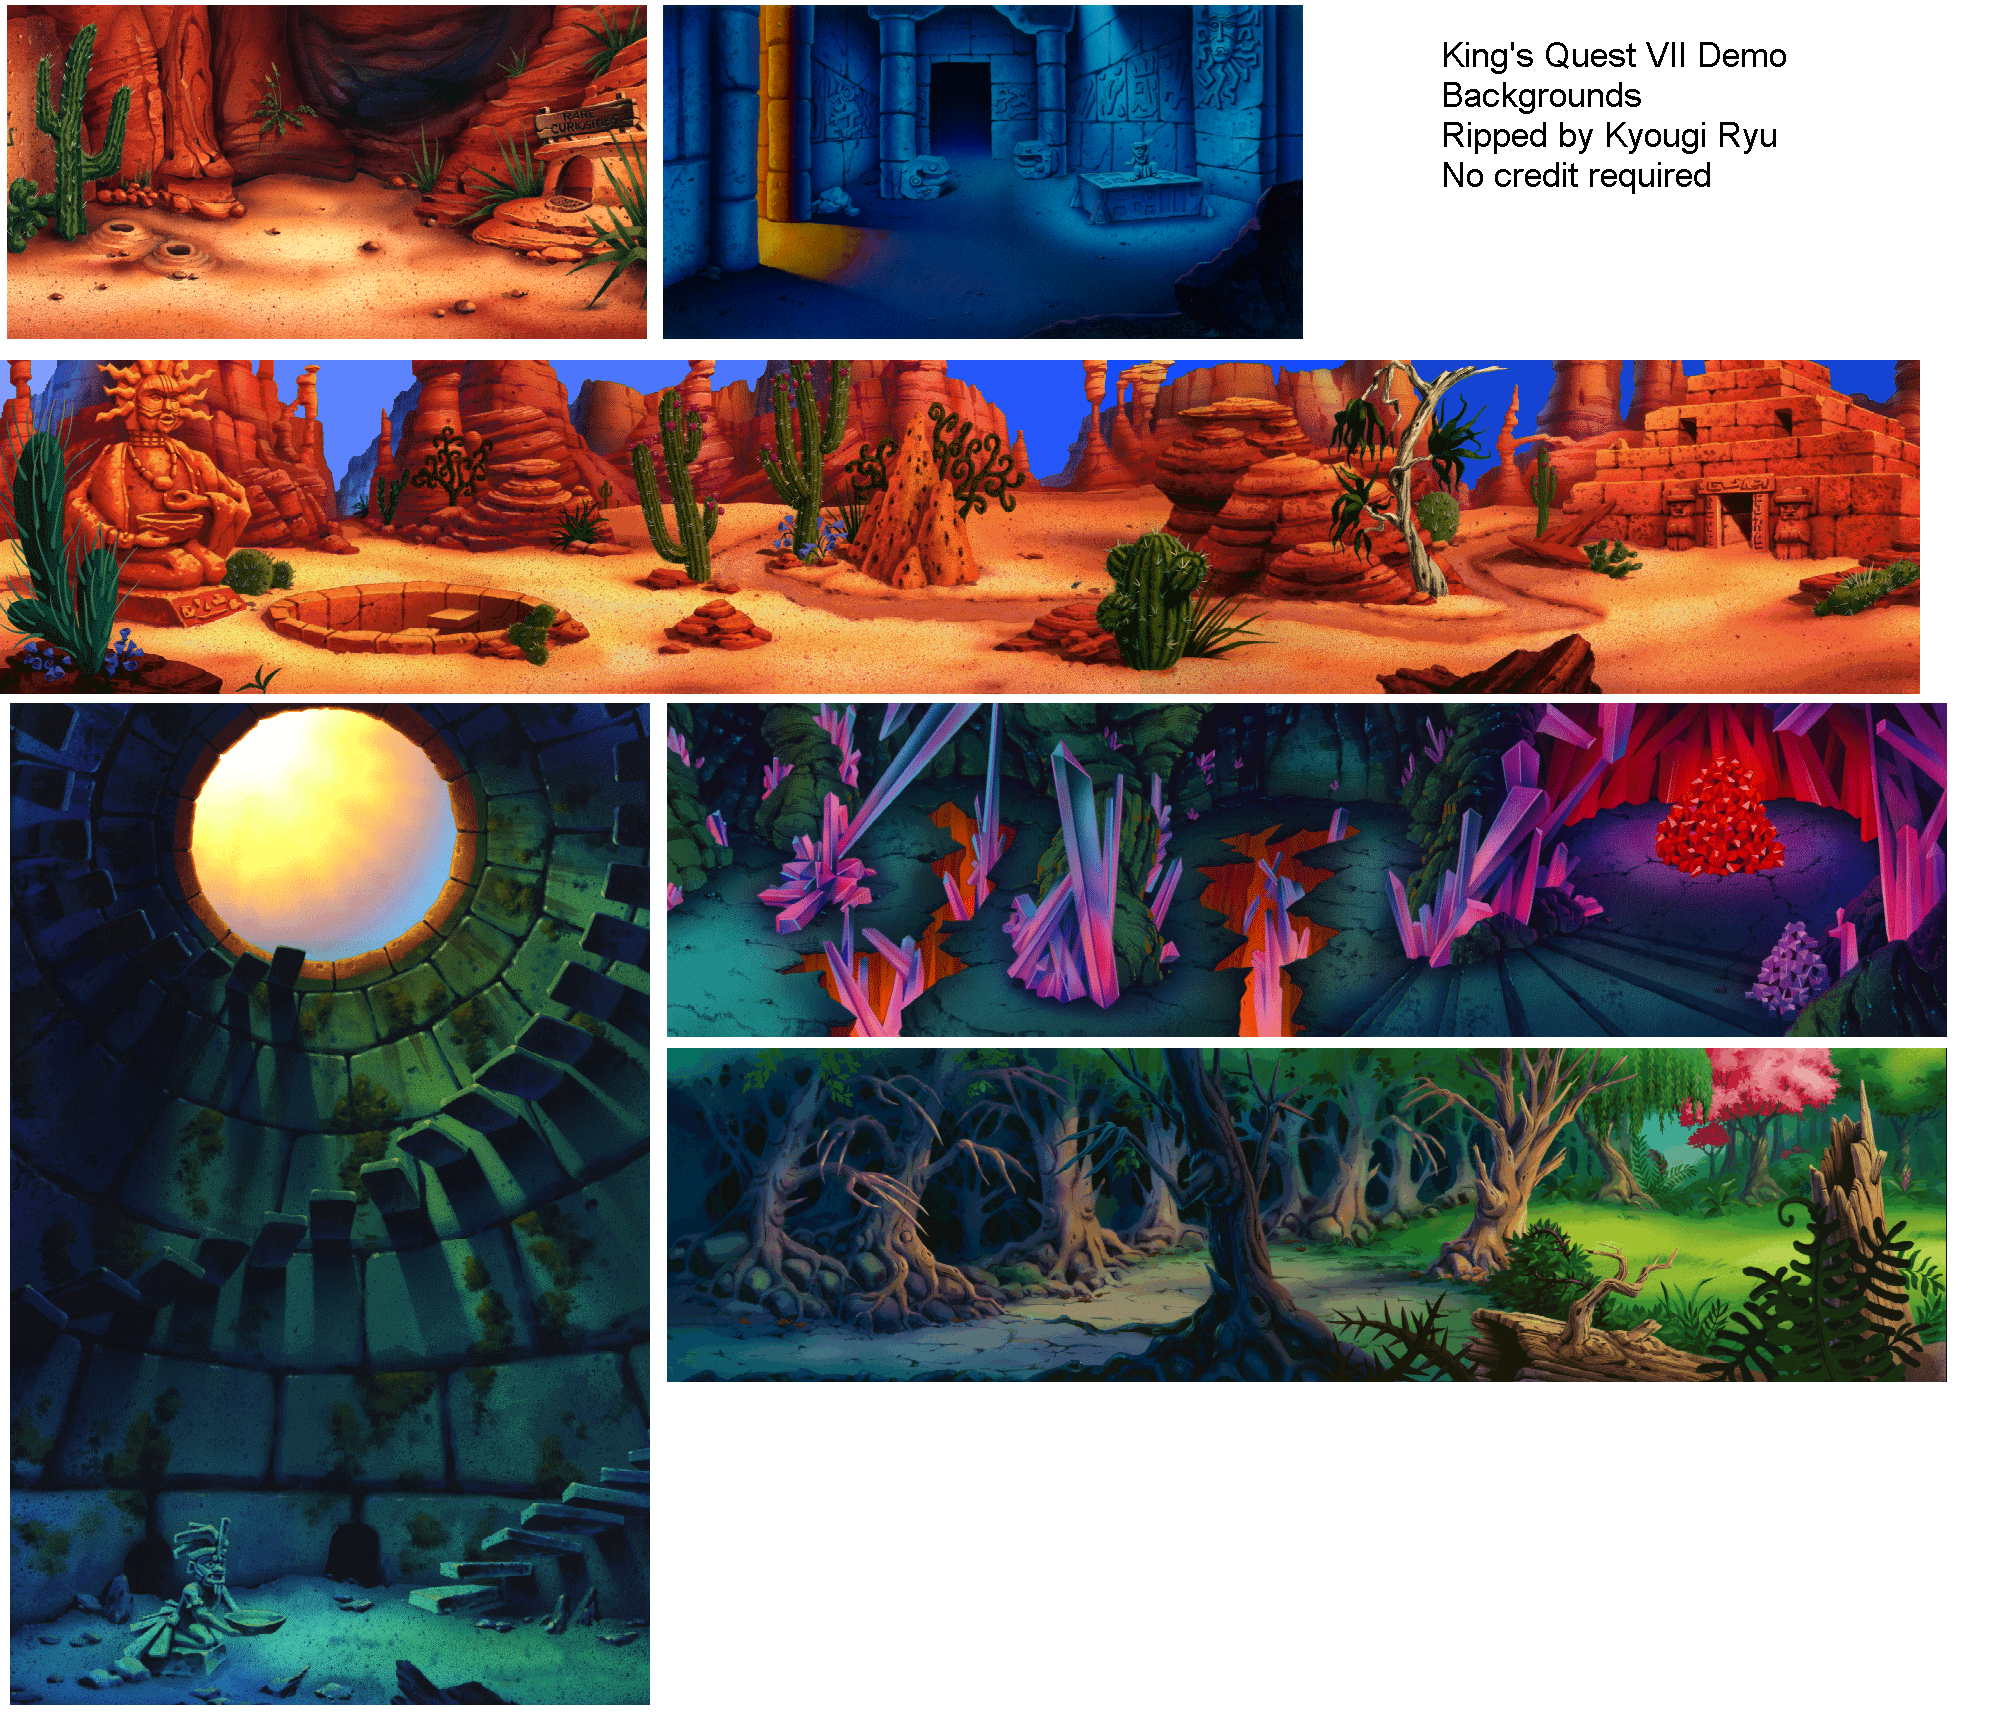 King's Quest 7 (Demo) - Backgrounds